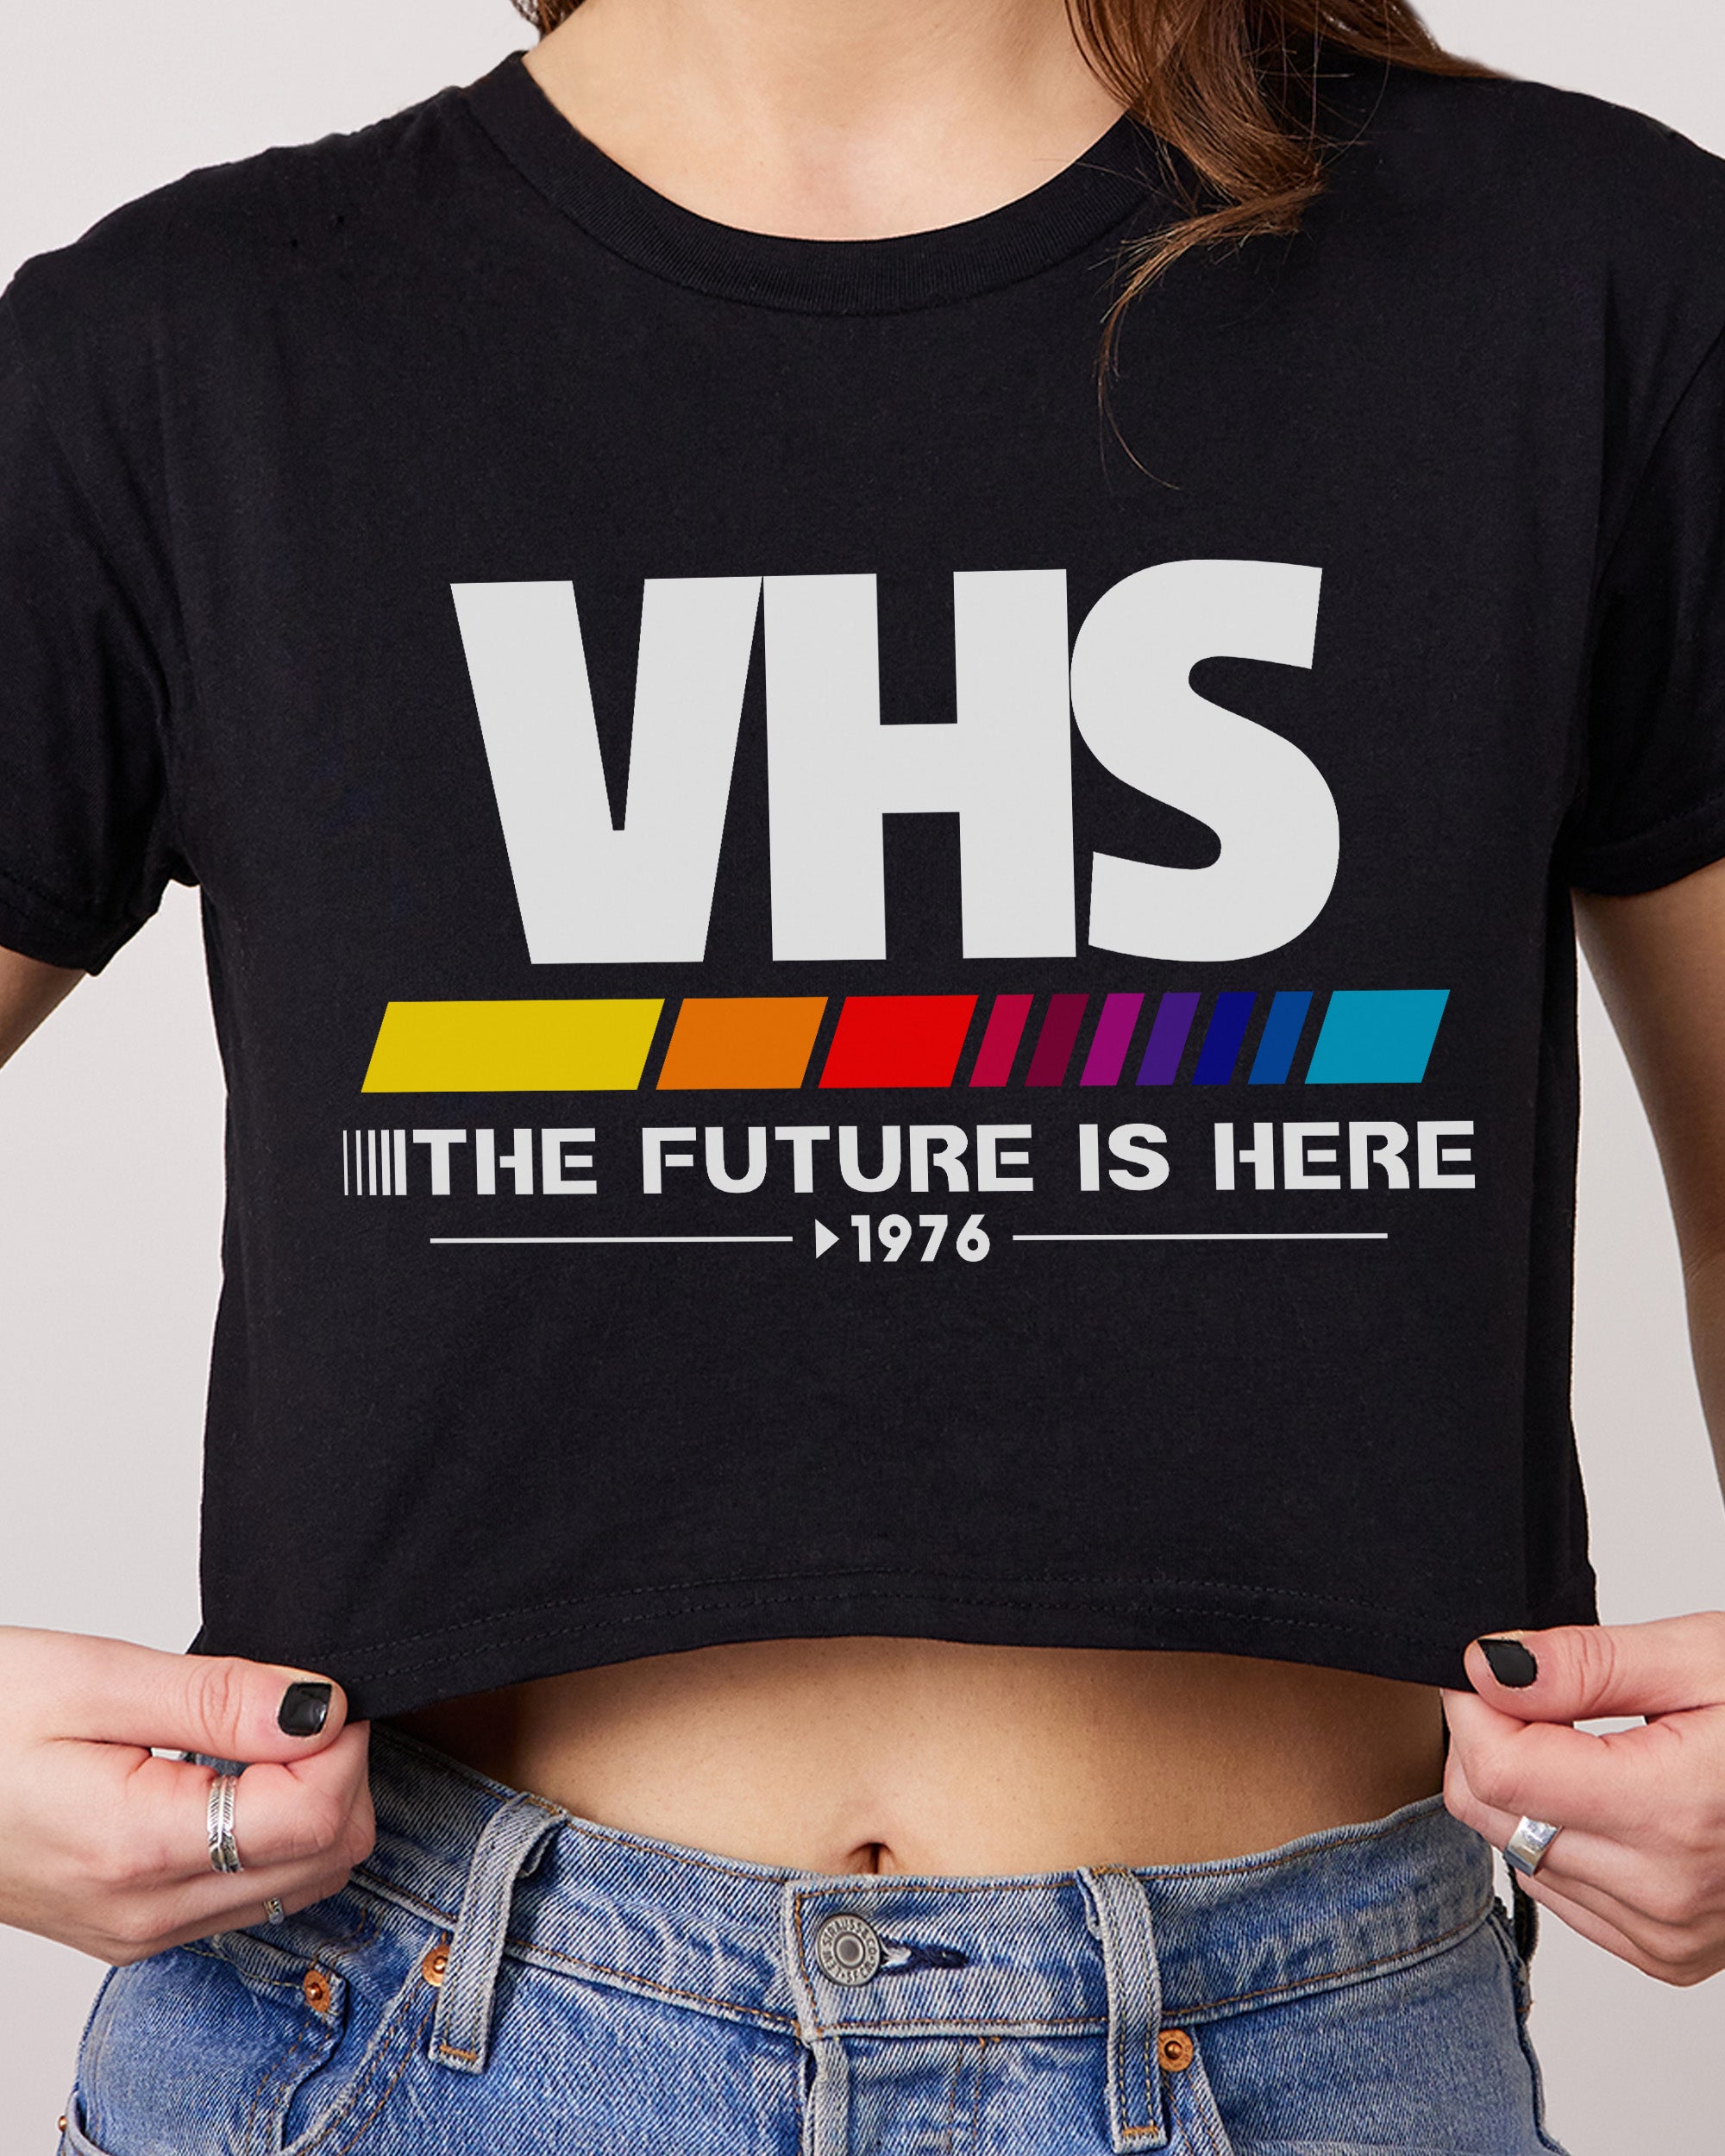 VHS - The Future is Now Crop Tee Australia Online